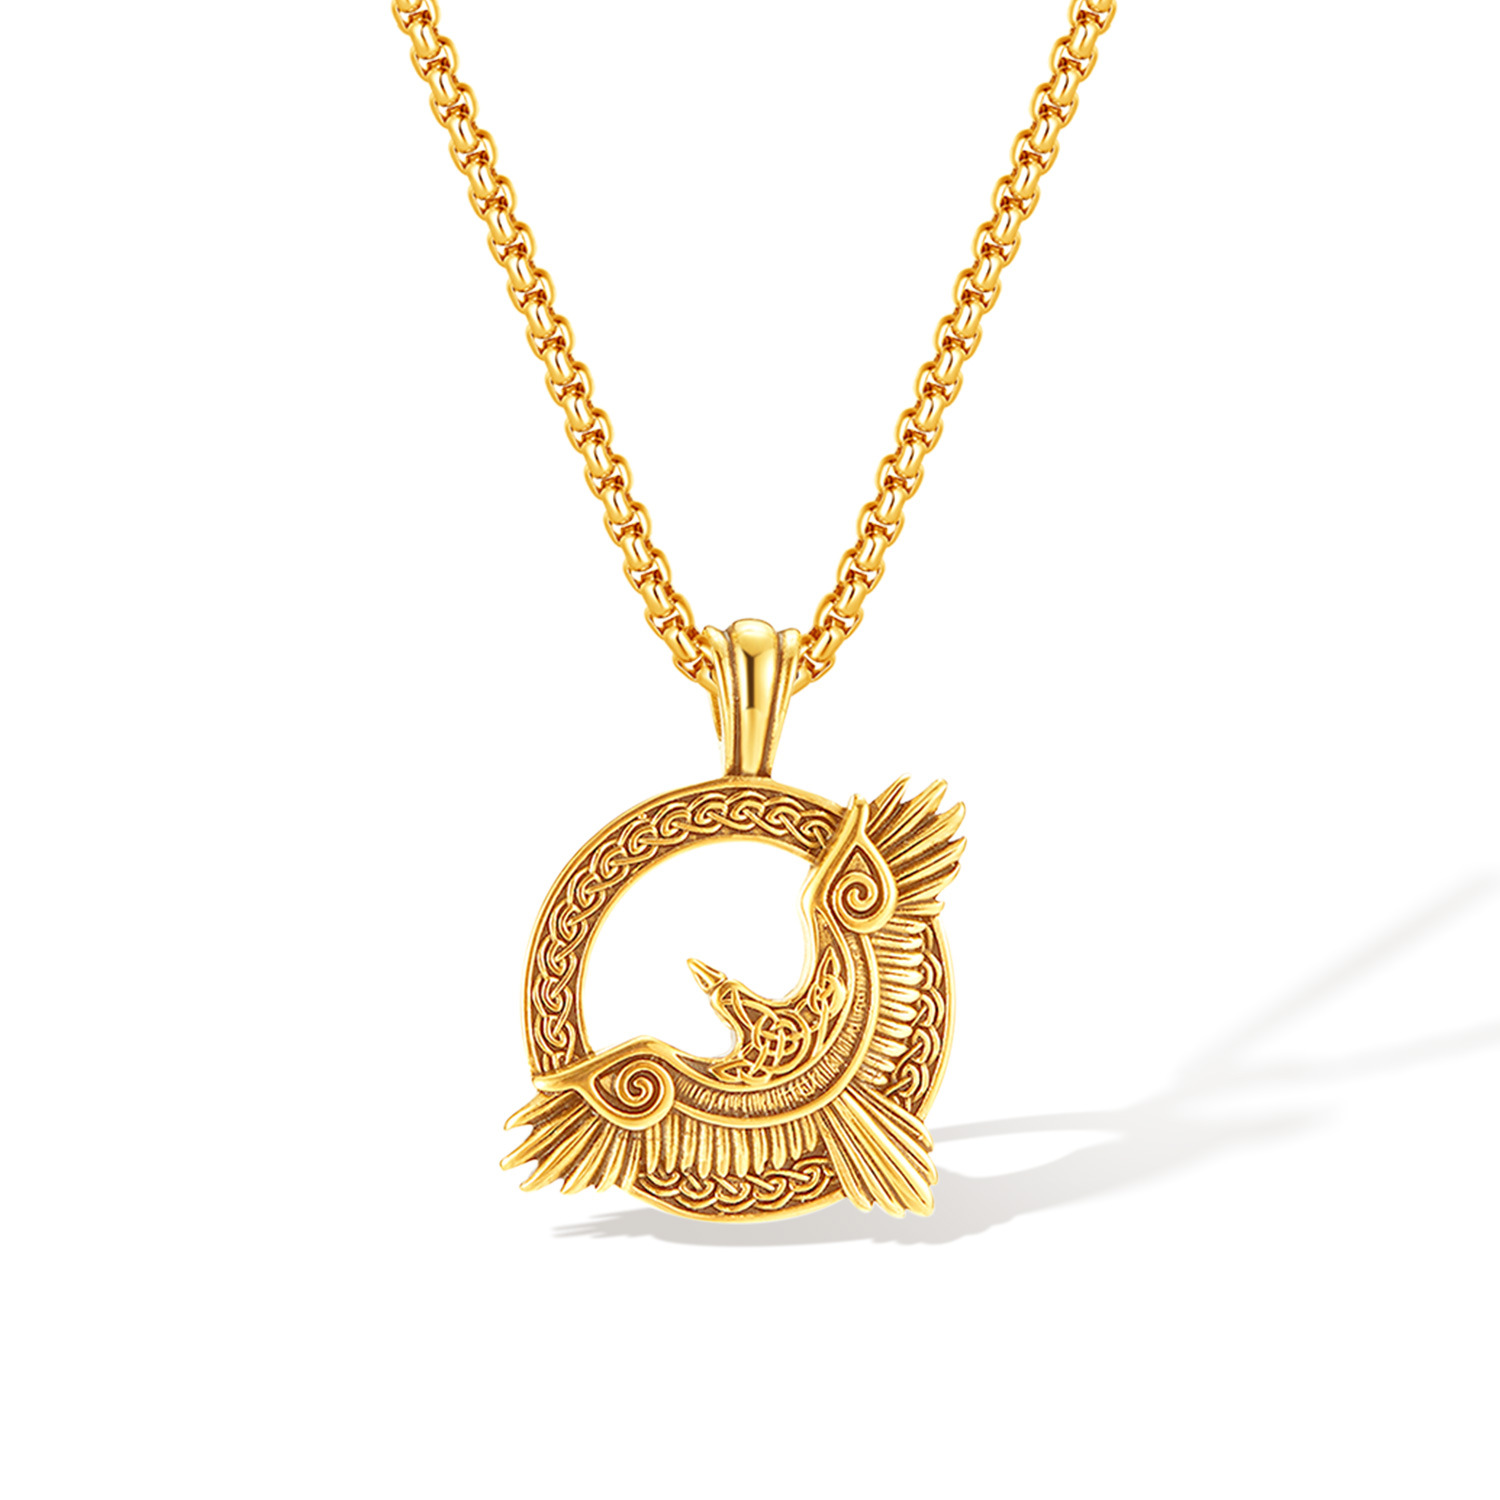 6:Gold pendant with chain 4x70cm